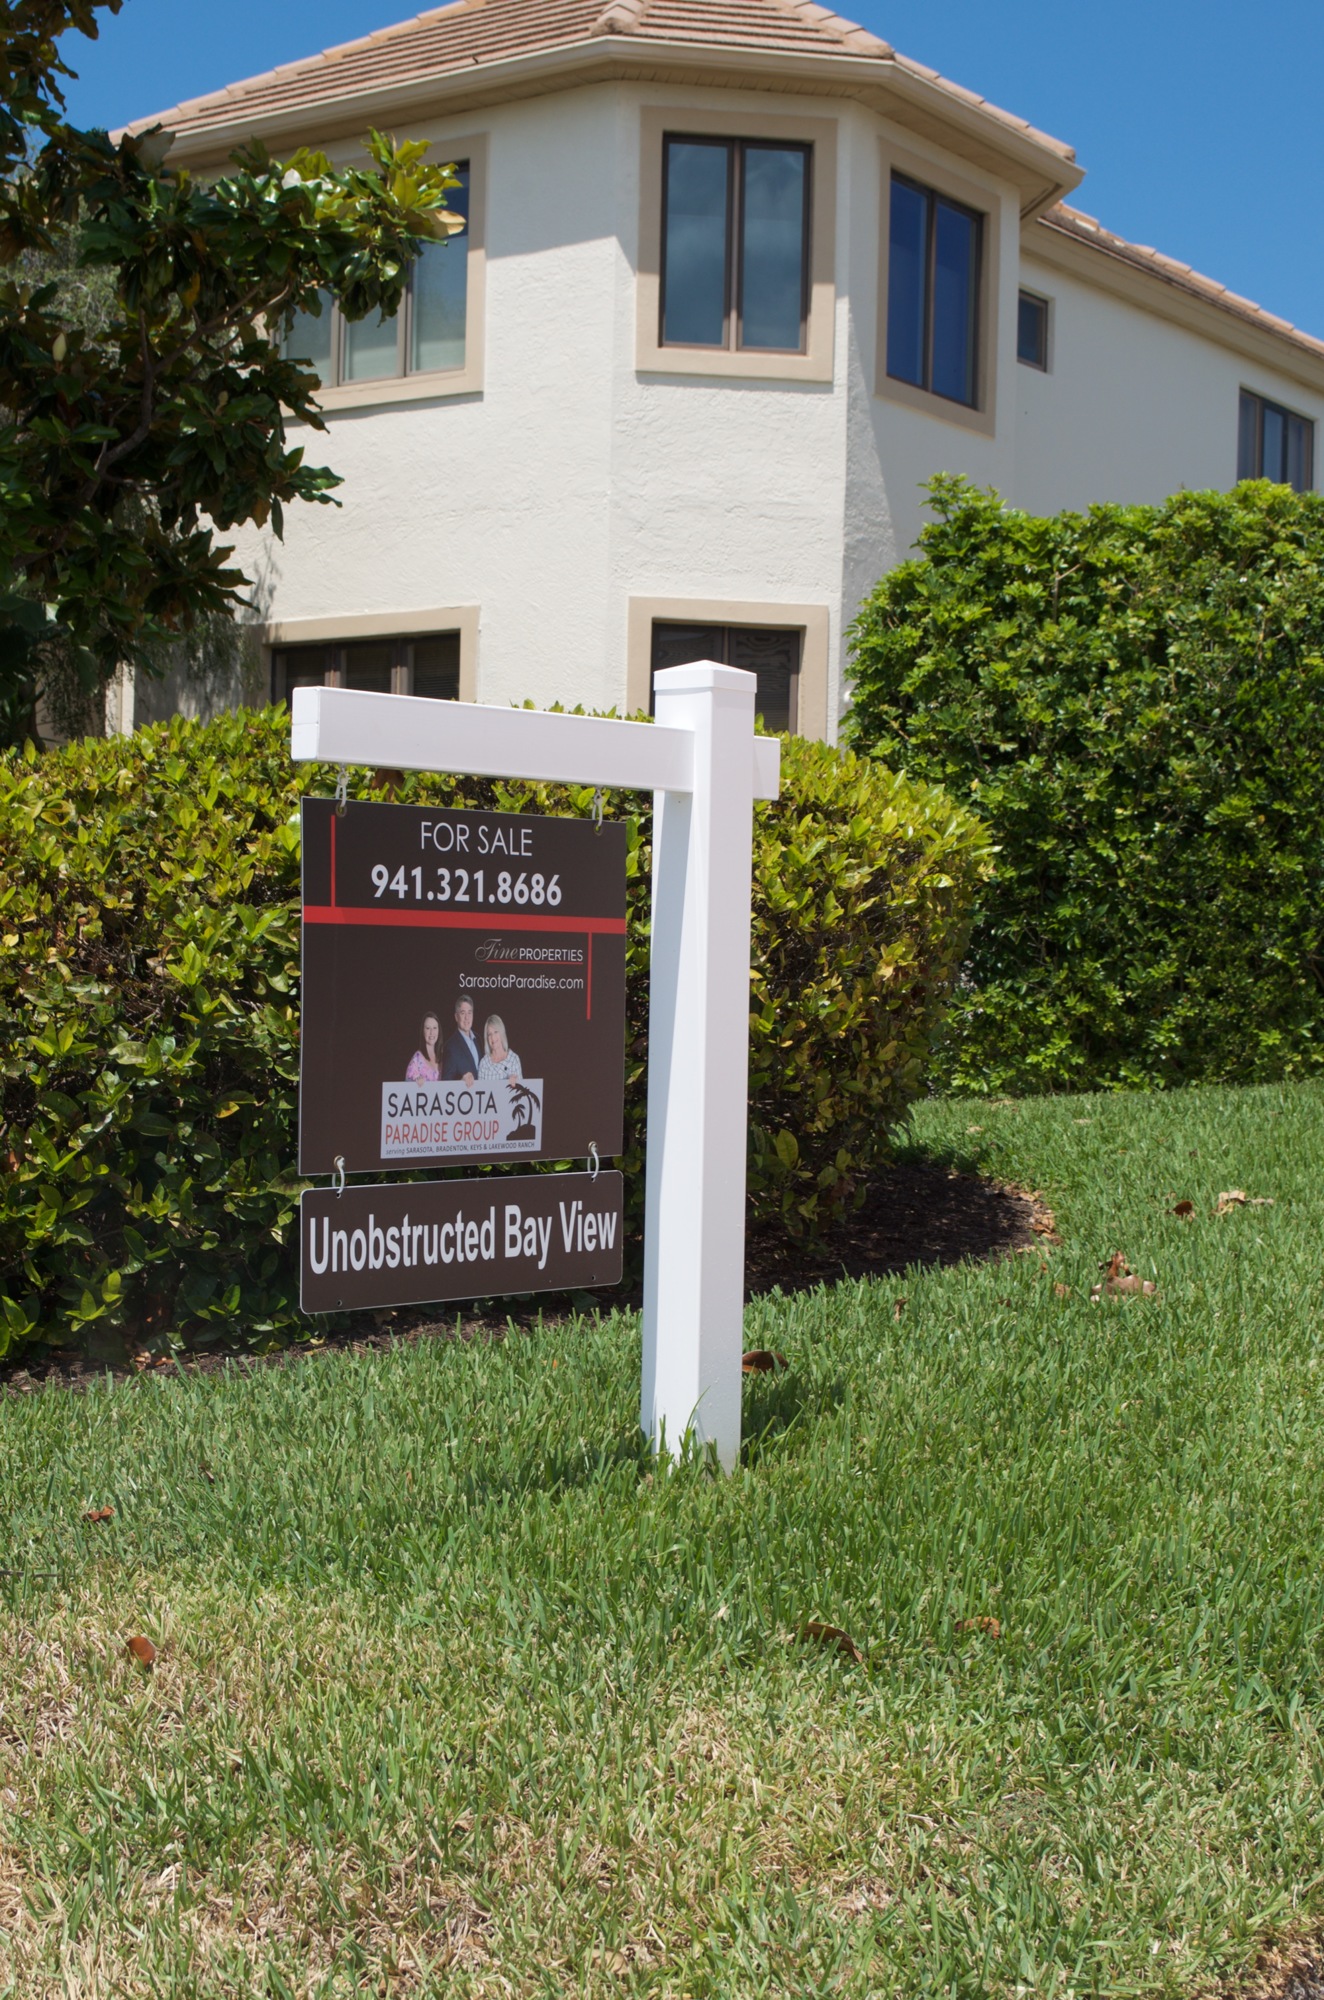 Homes for sale, rent or lease are permitted a three-square-foot sign. The top of the pole can be no higher than four feet.